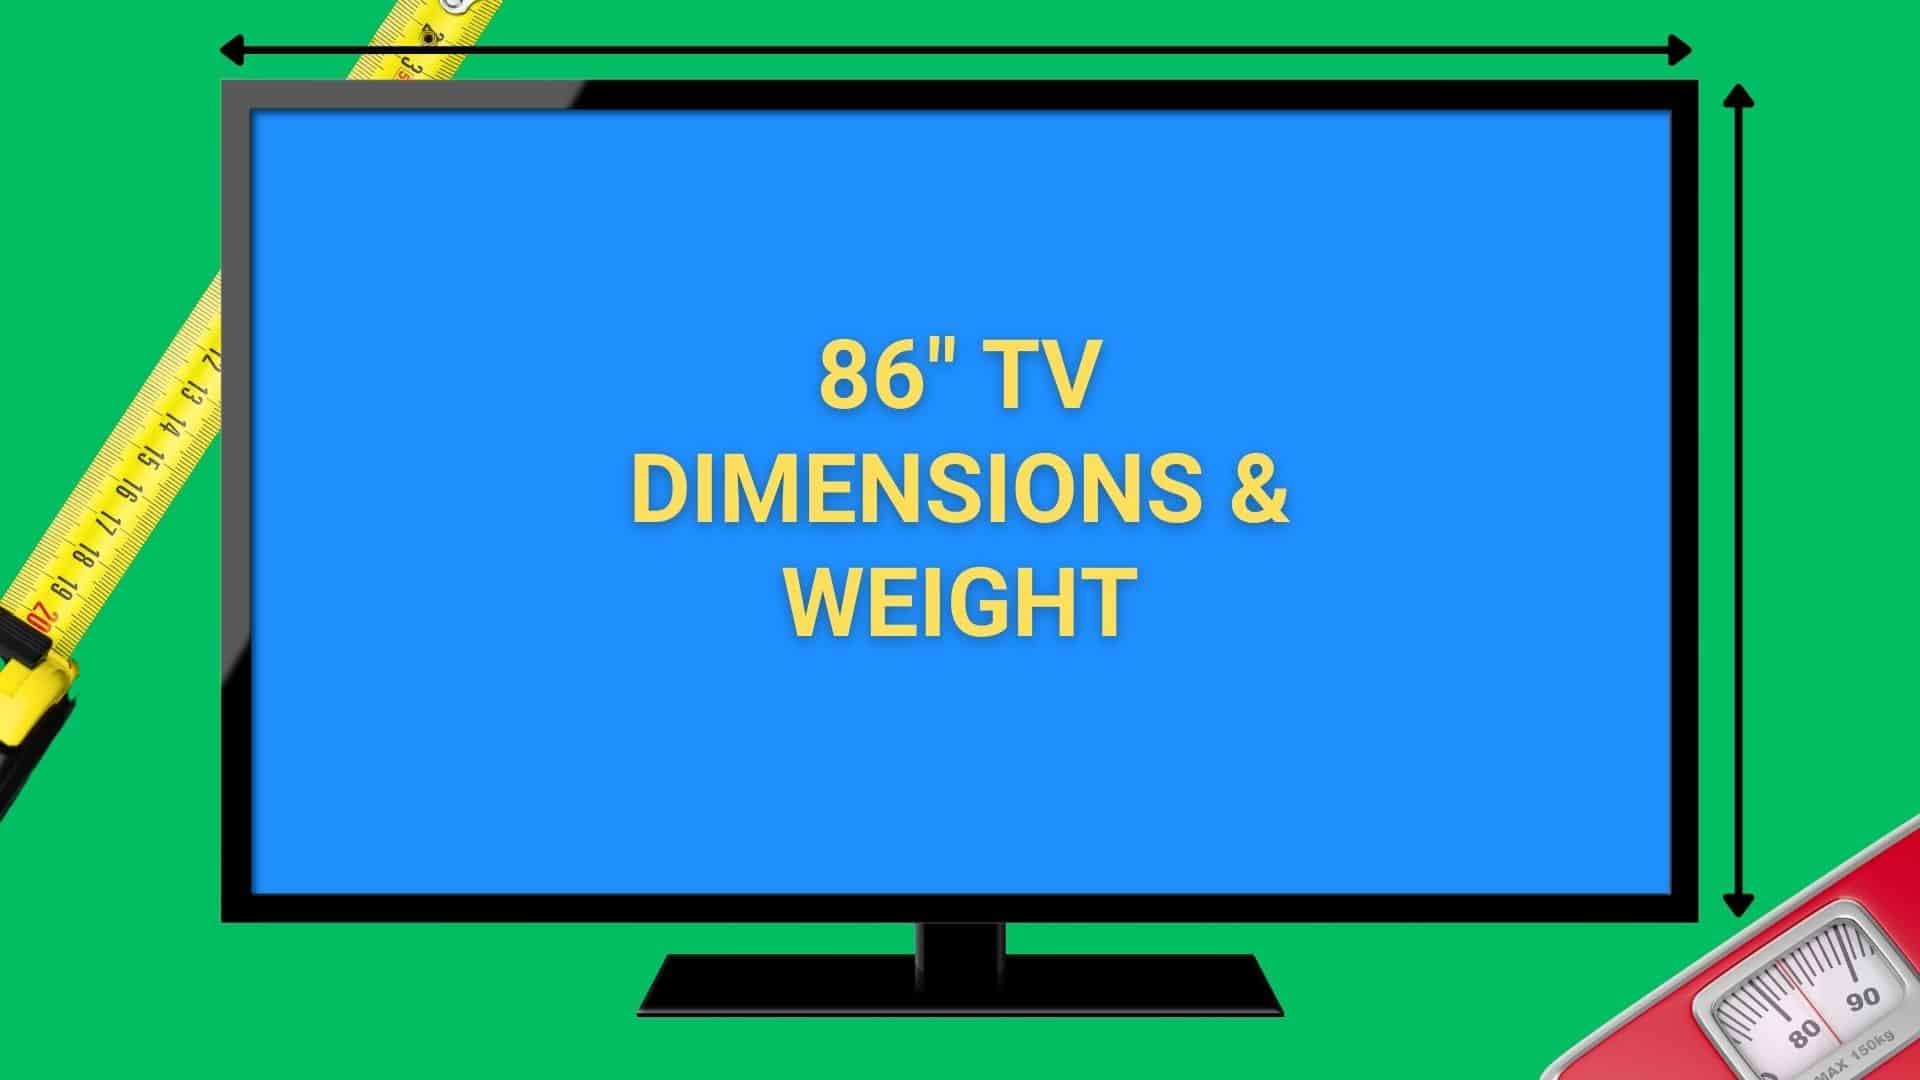 Image of 86 inch TV with measuring tape and bath scale in background.